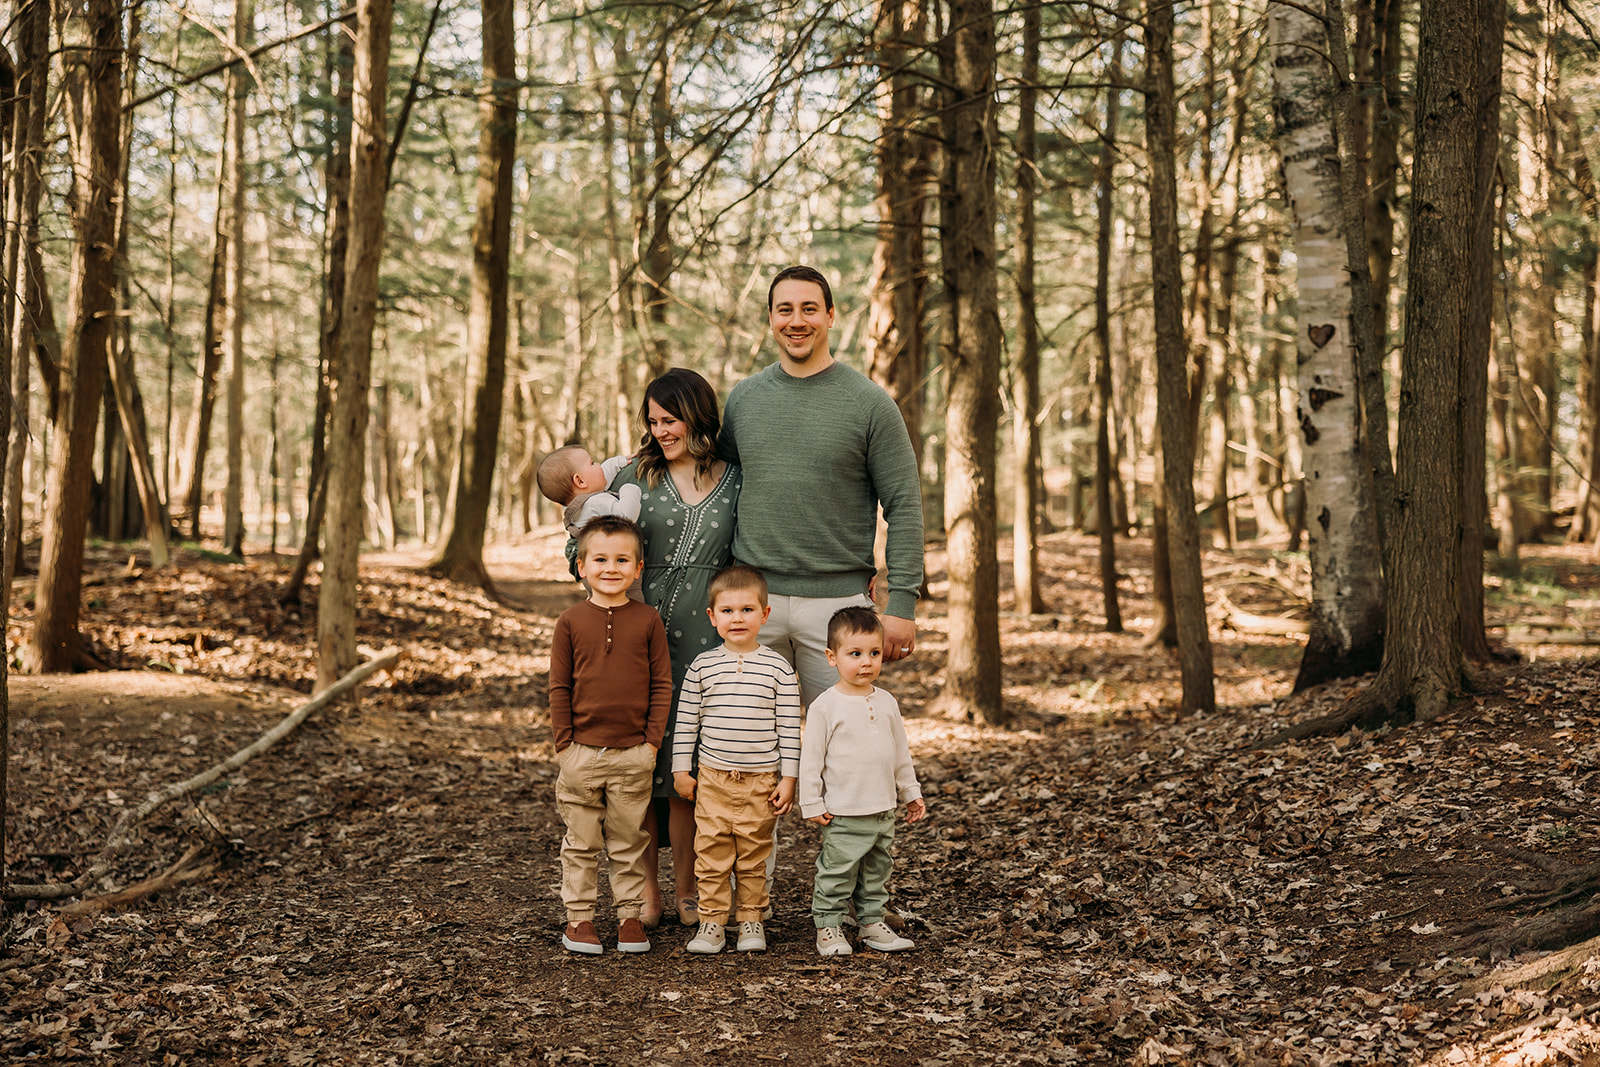 Smiling family in a forest photoshoot surrounded by lush greenery